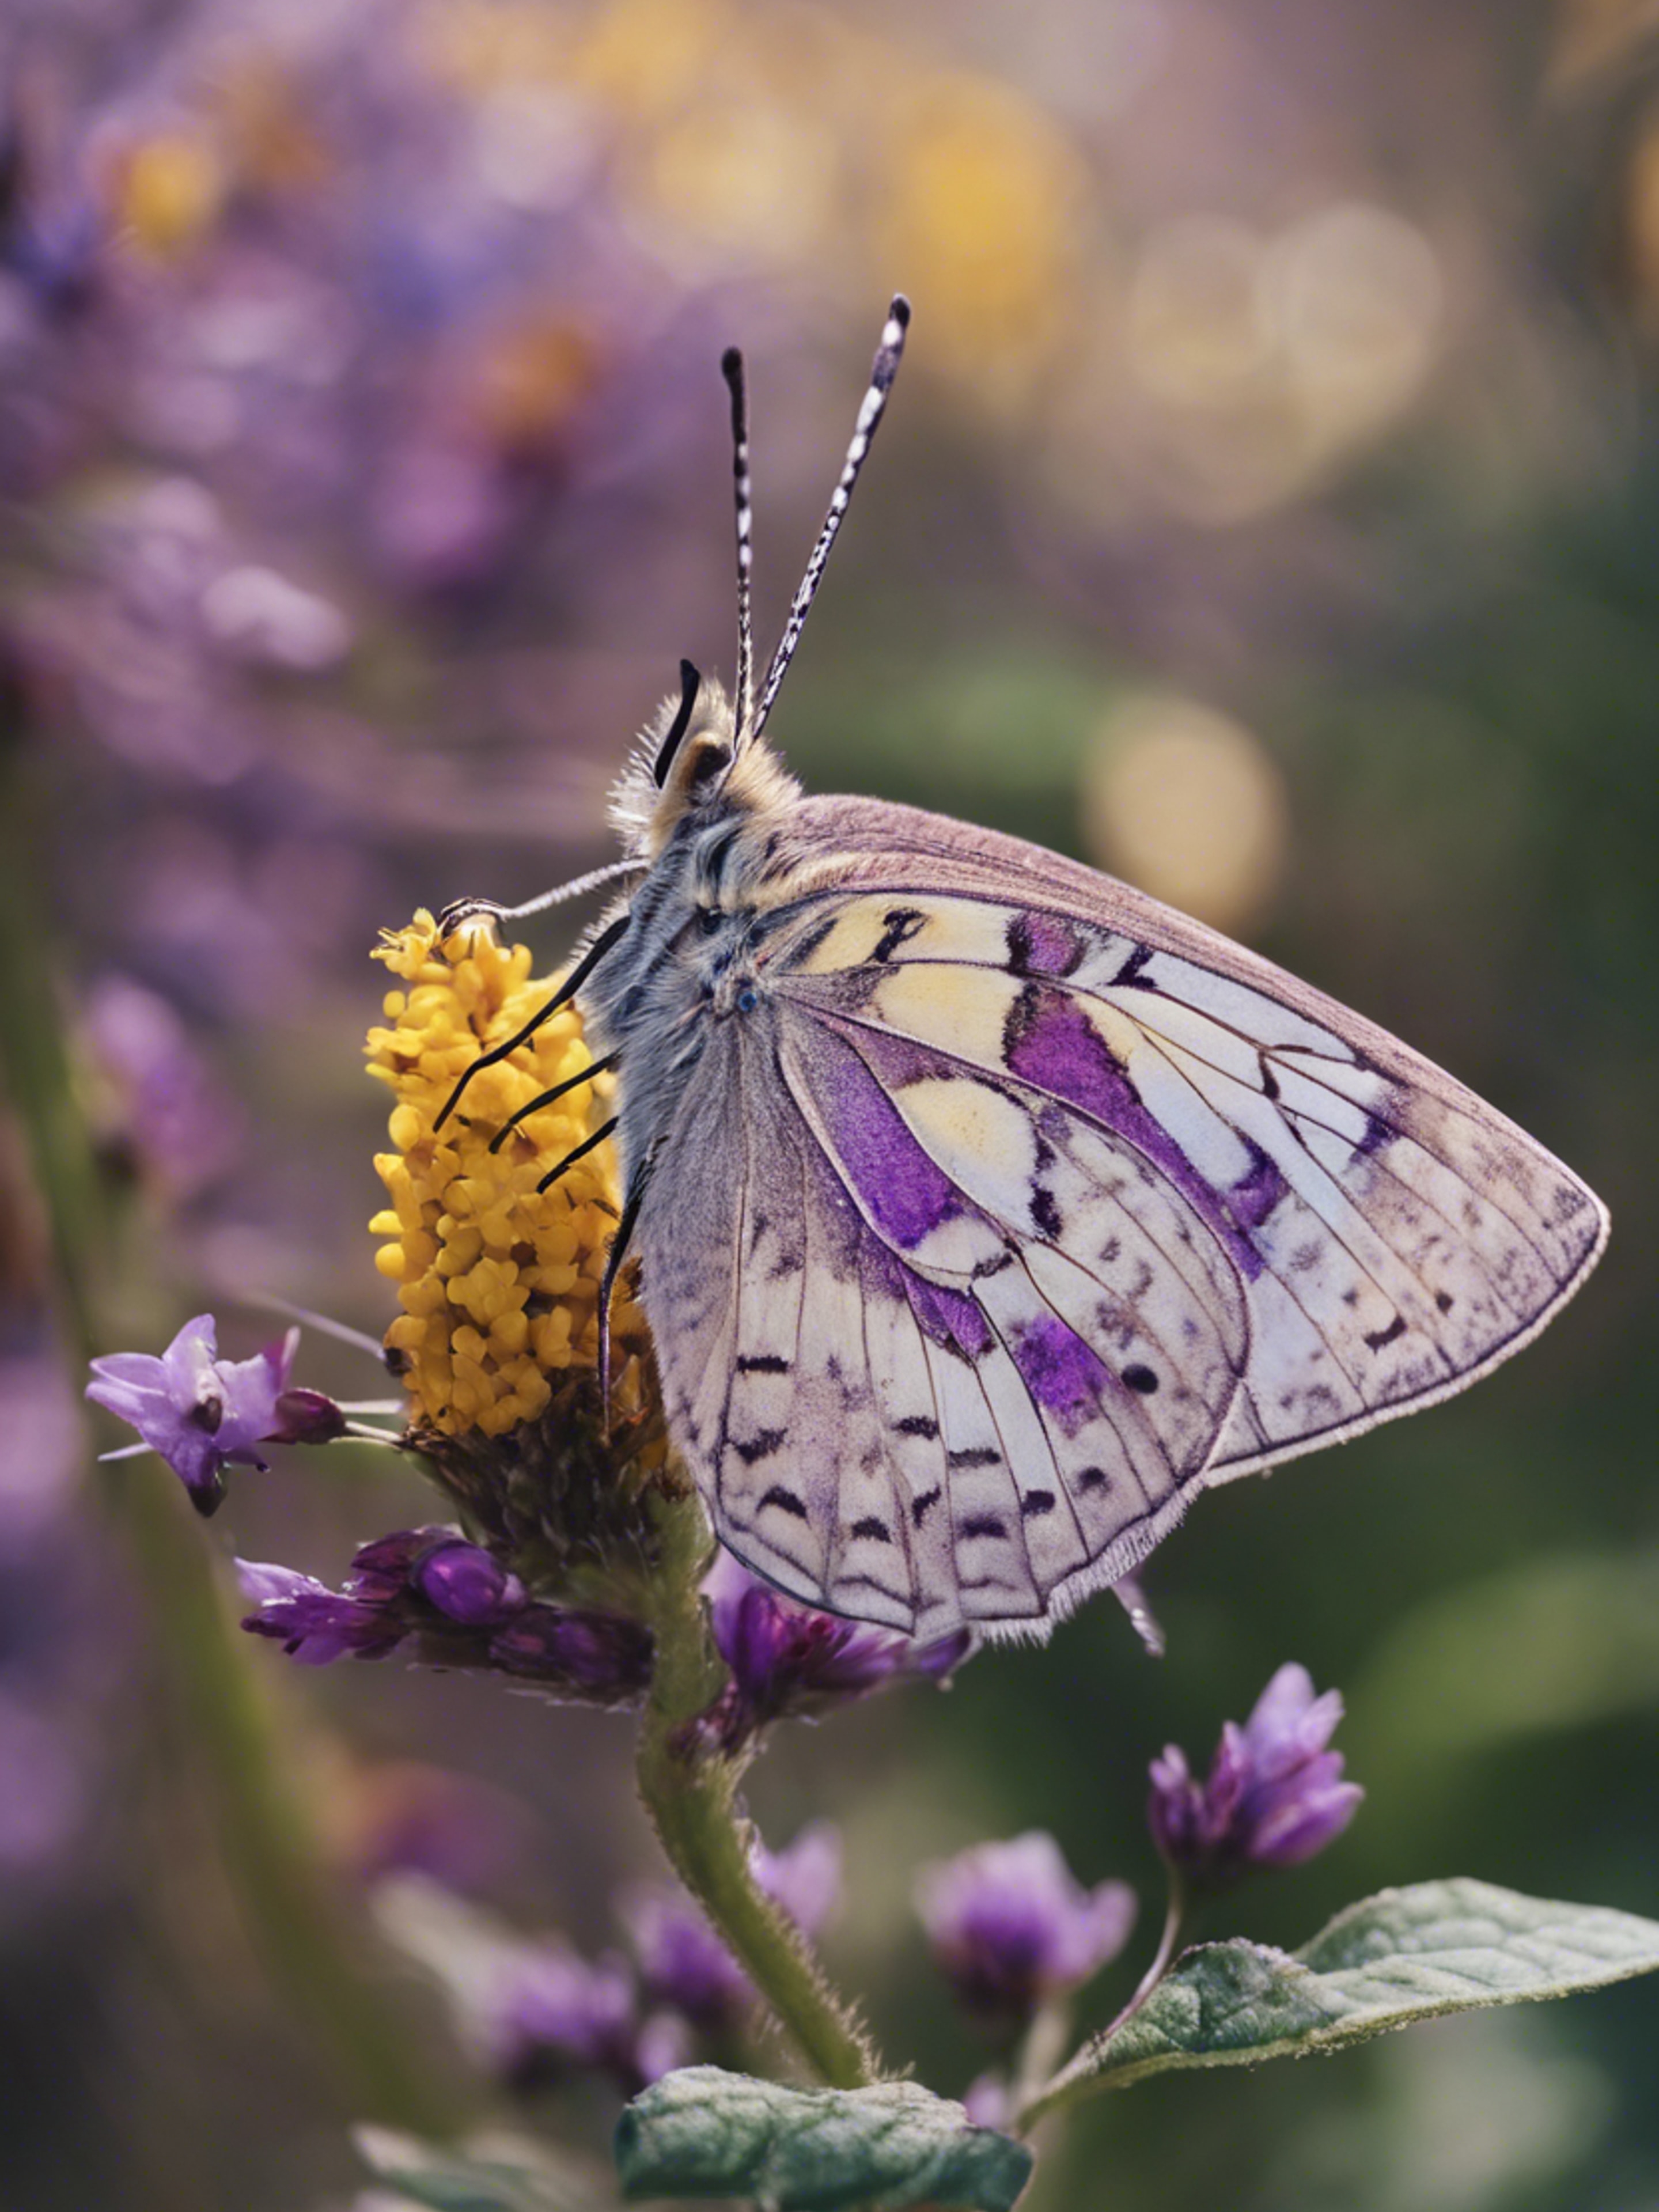 A beautiful butterfly with detailed purple and yellow wings resting on a blooming flower. کاغذ دیواری[3e976ae7be264a5da695]